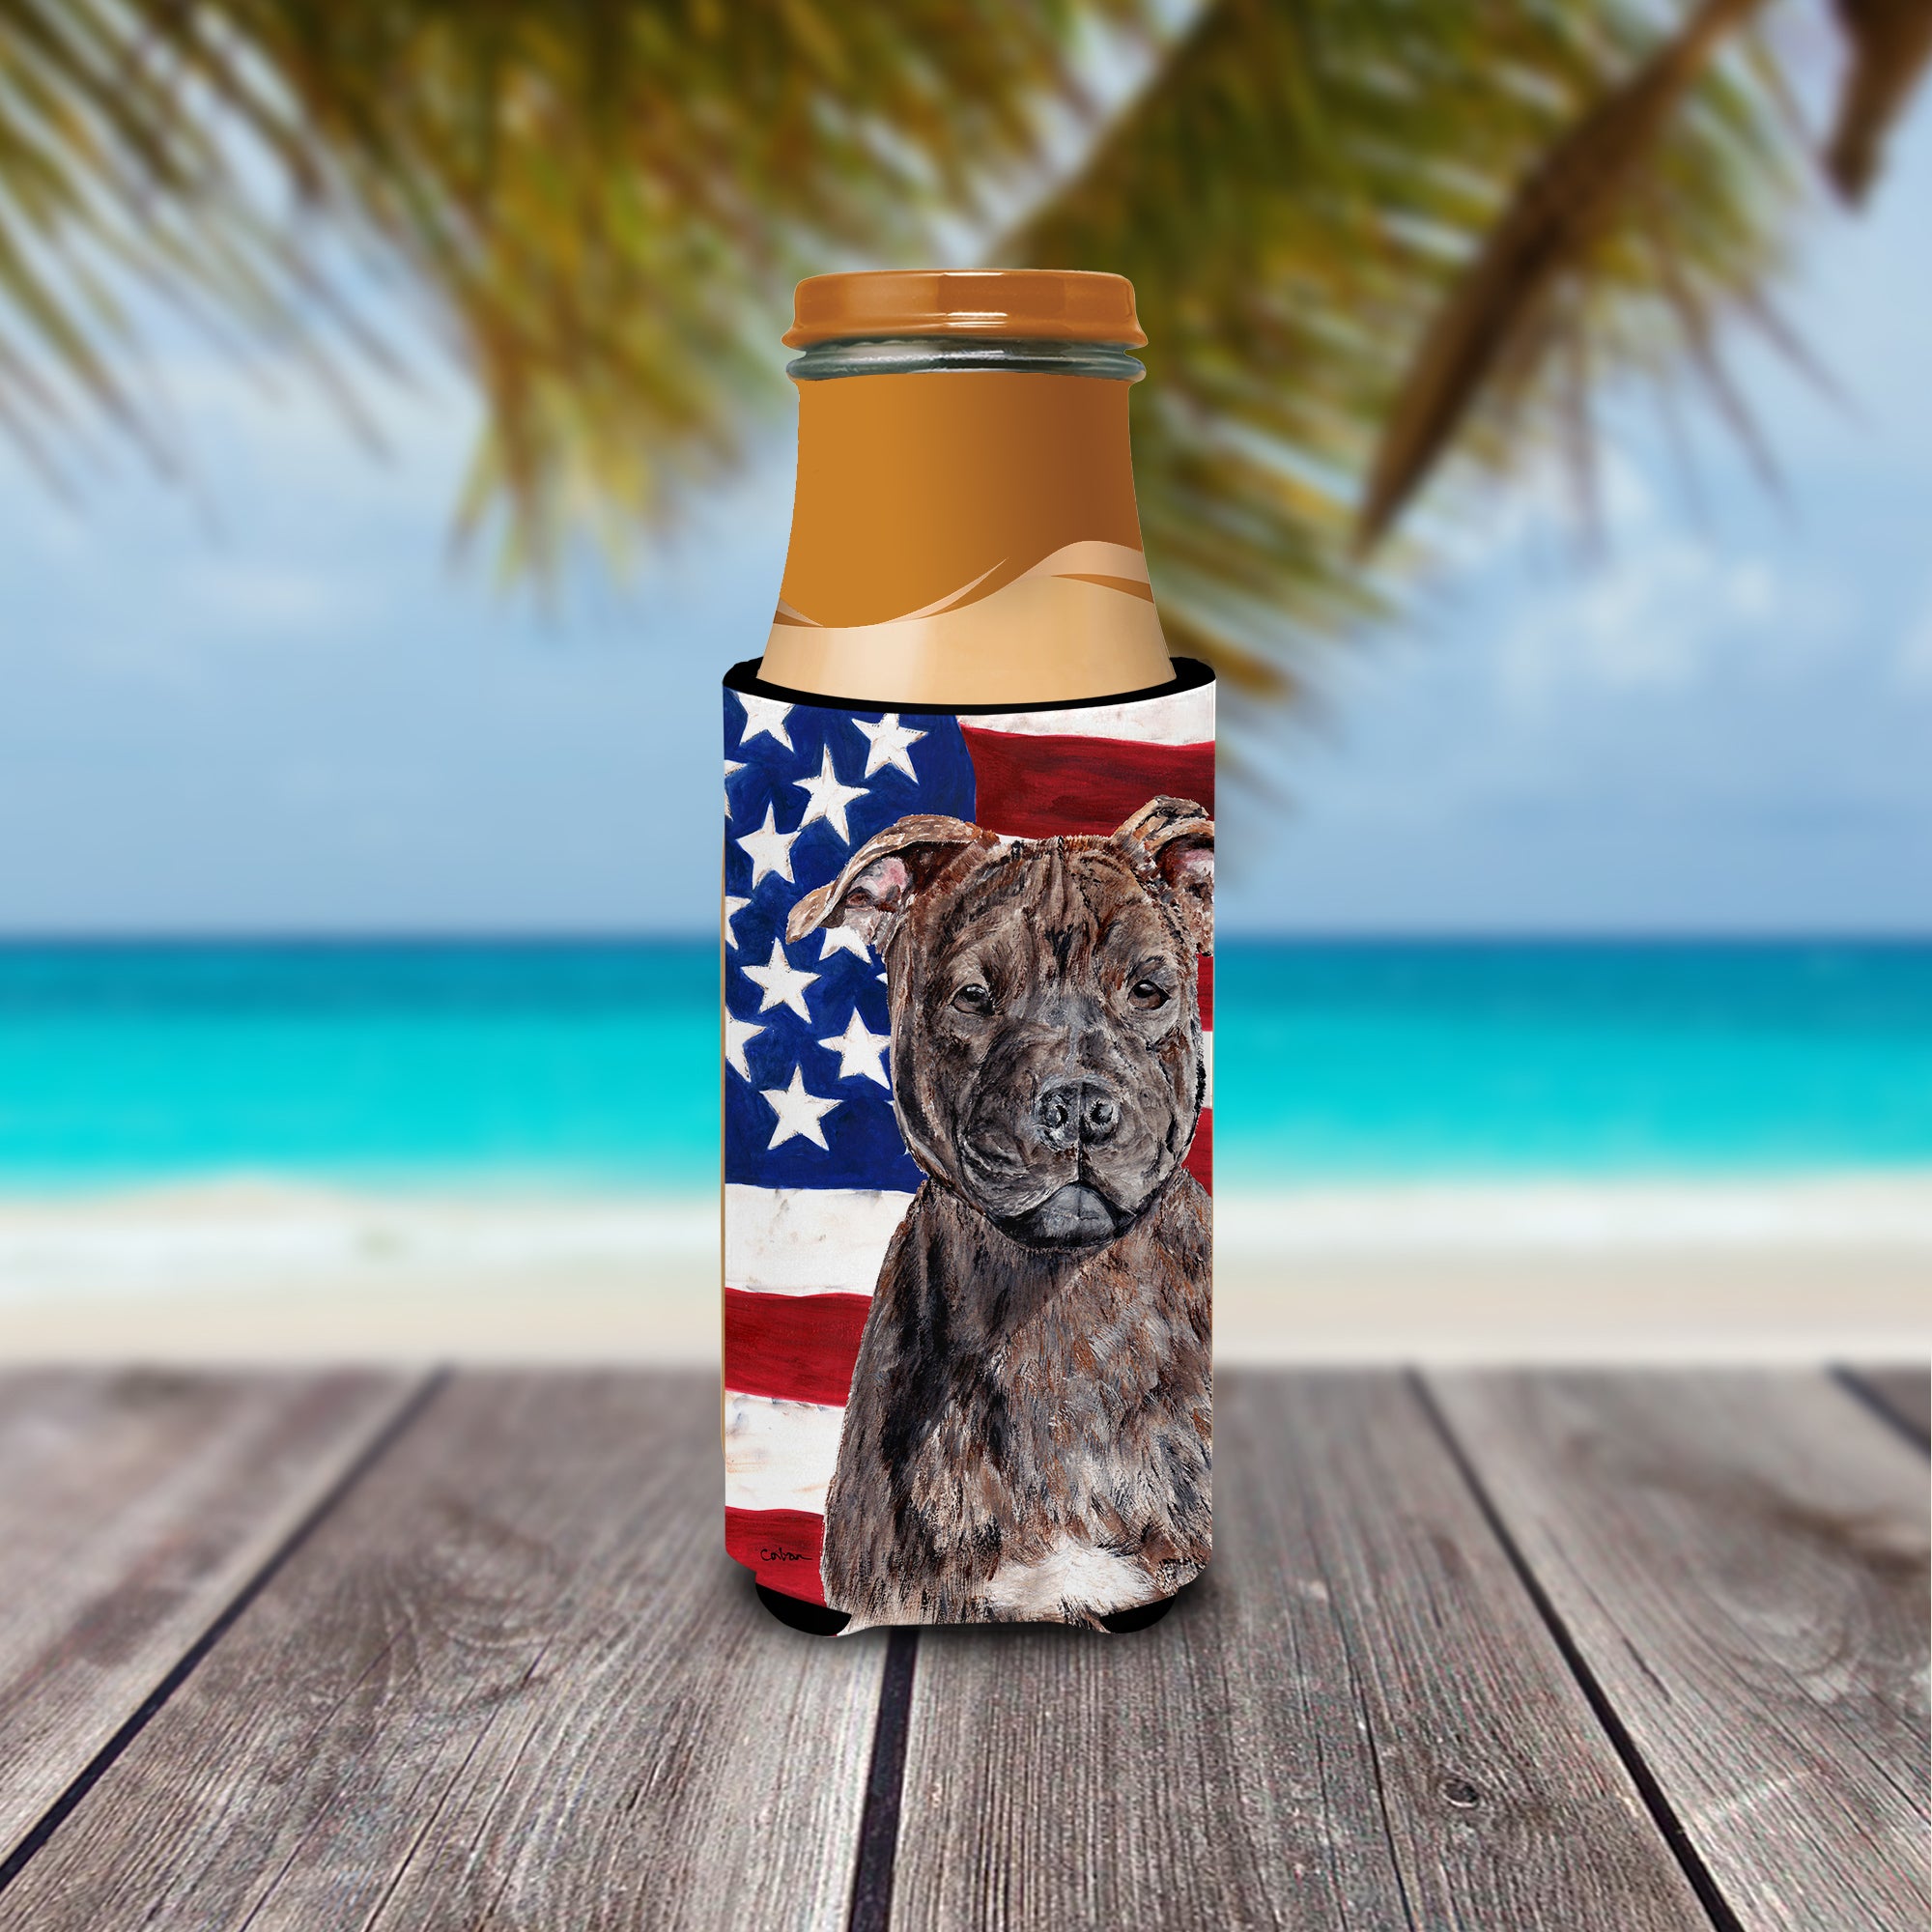 Staffordshire Bull Terrier Staffie with American Flag USA Ultra Beverage Insulators for slim cans SC9633MUK